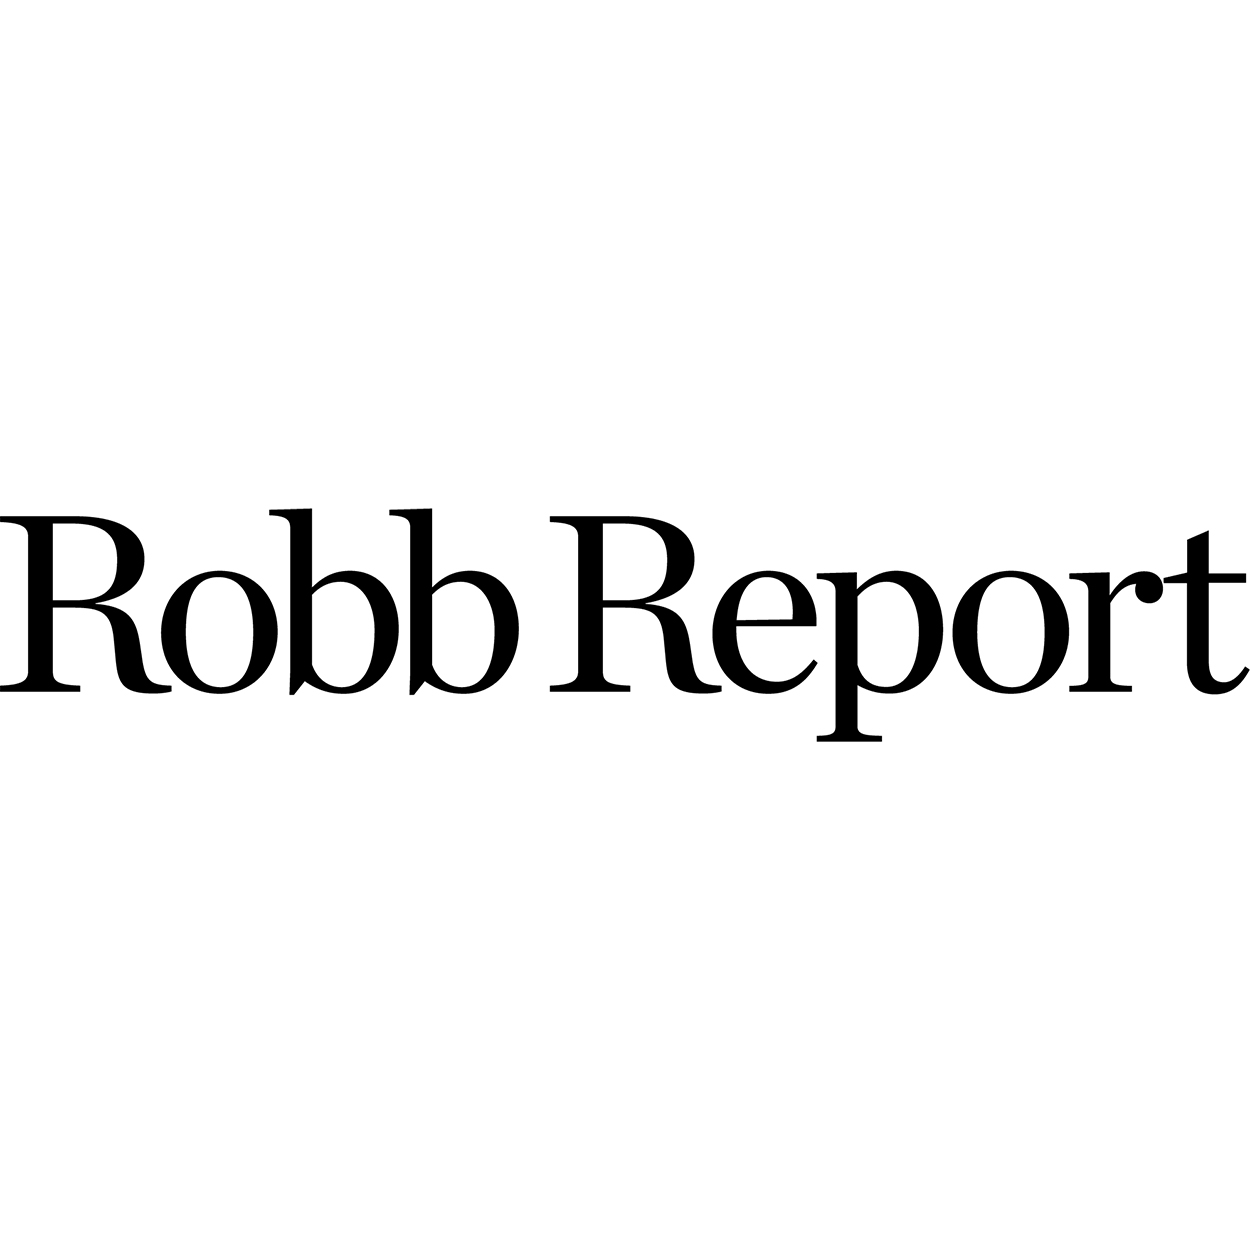 FORBER ROBB REPORT